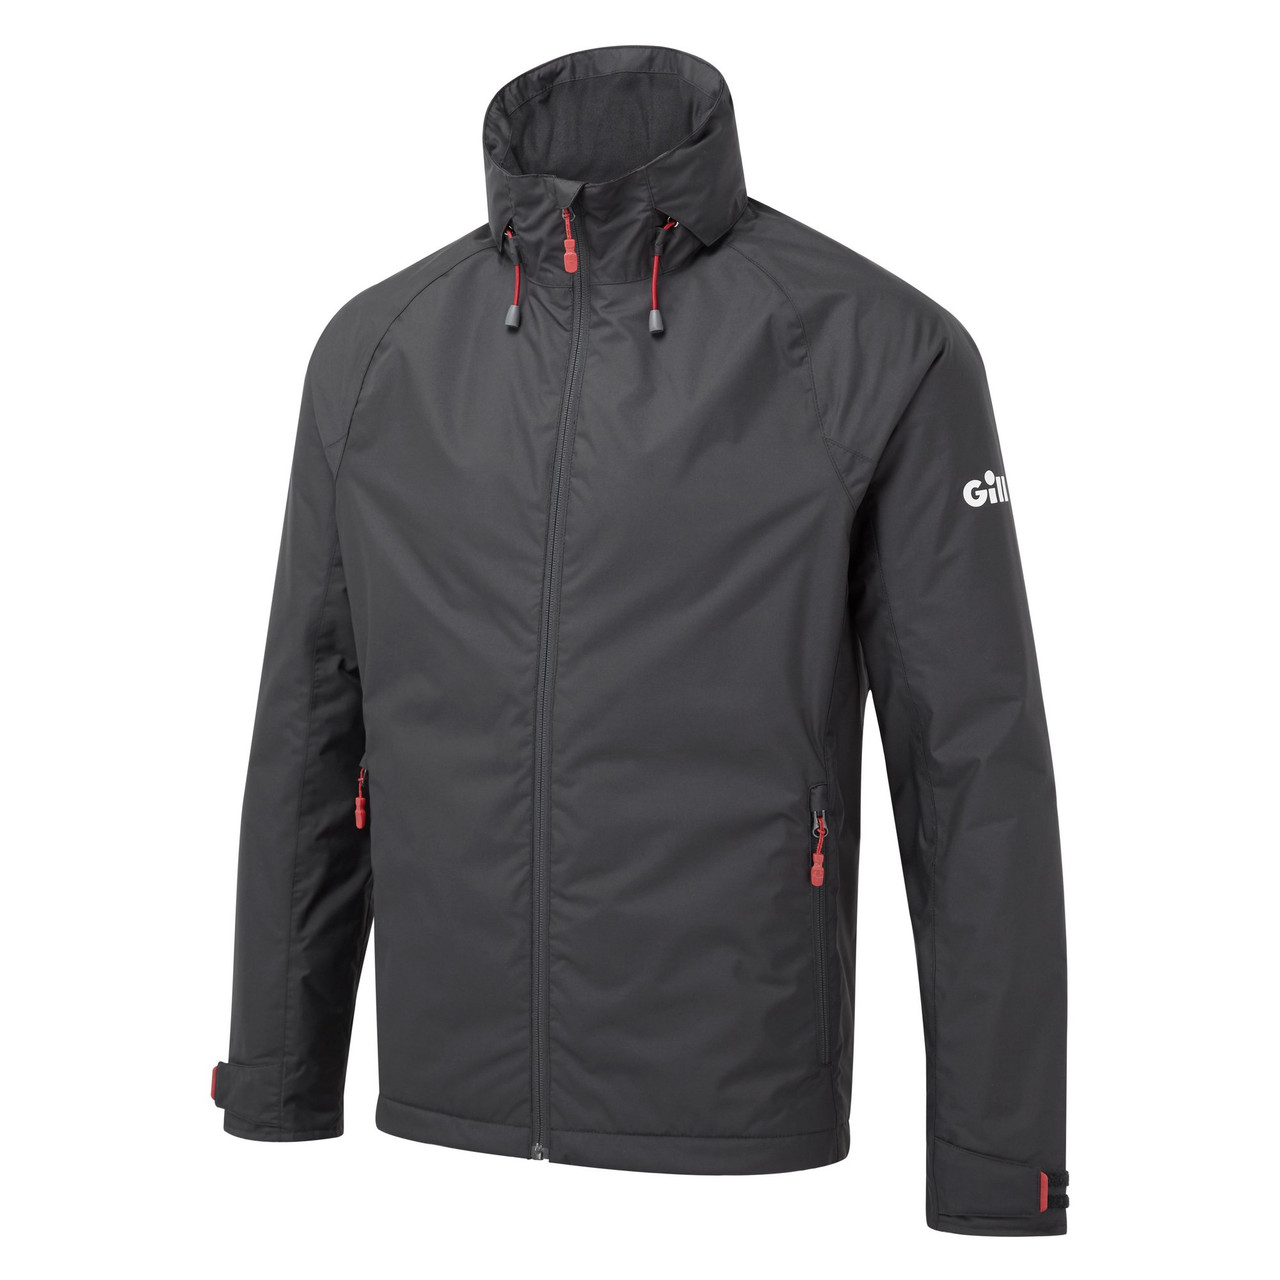 Men’s Hooded Insulated Jacket - GB Gill Marine